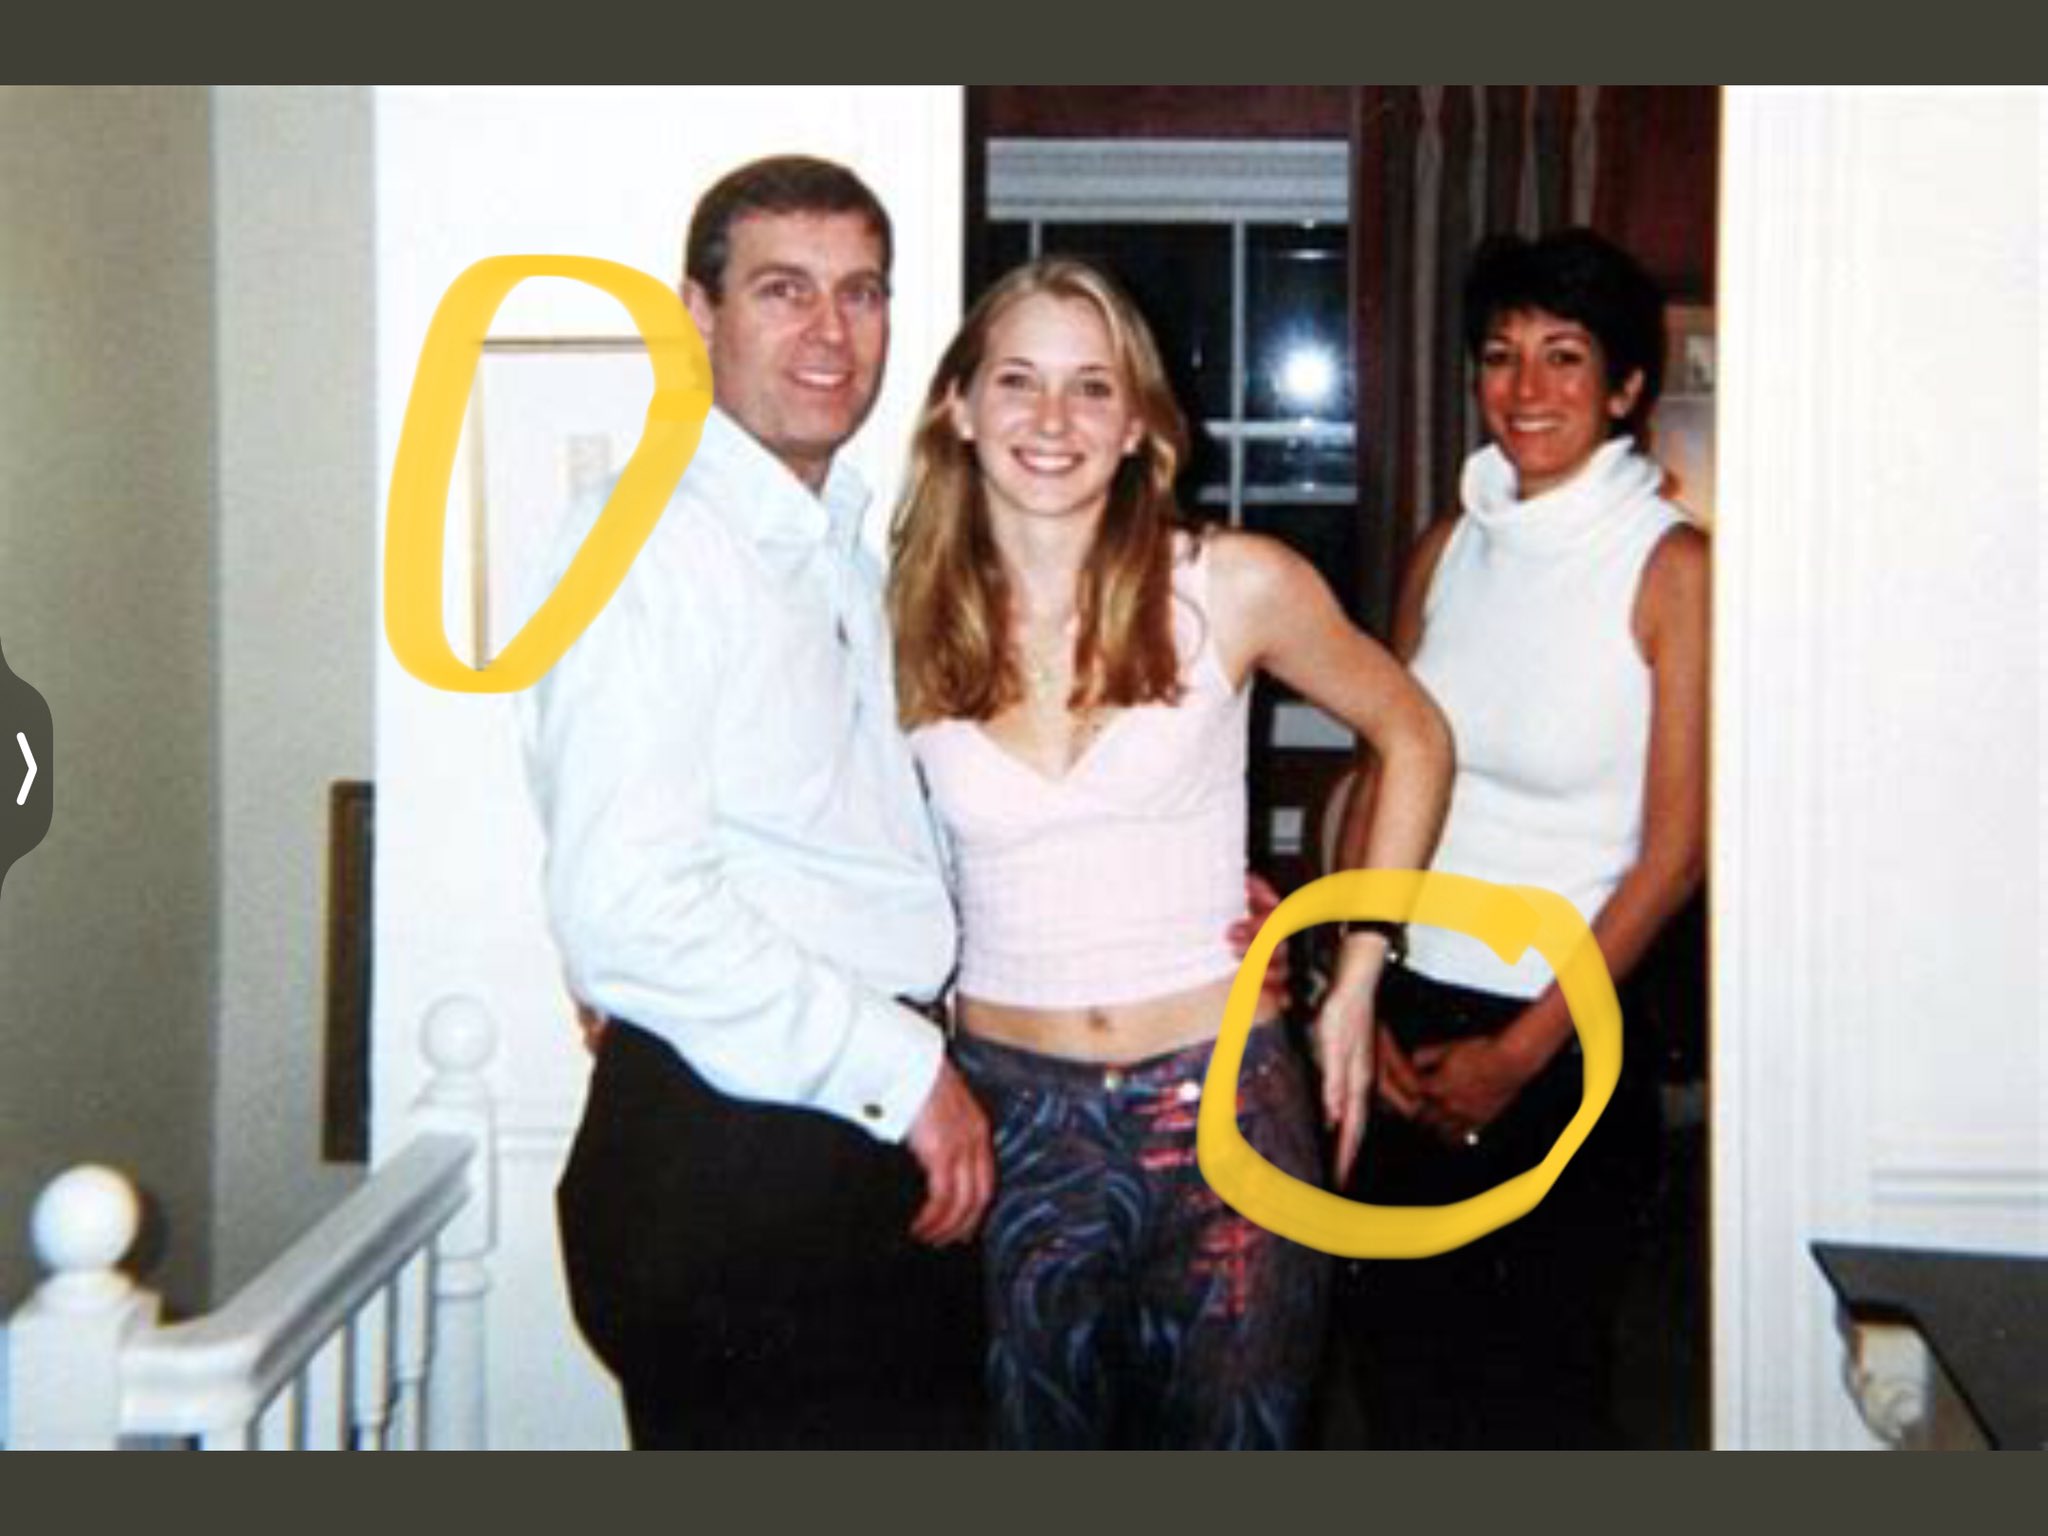 Ghislaine Maxwell says Prince Andrew, Virginia Giuffre photo not real